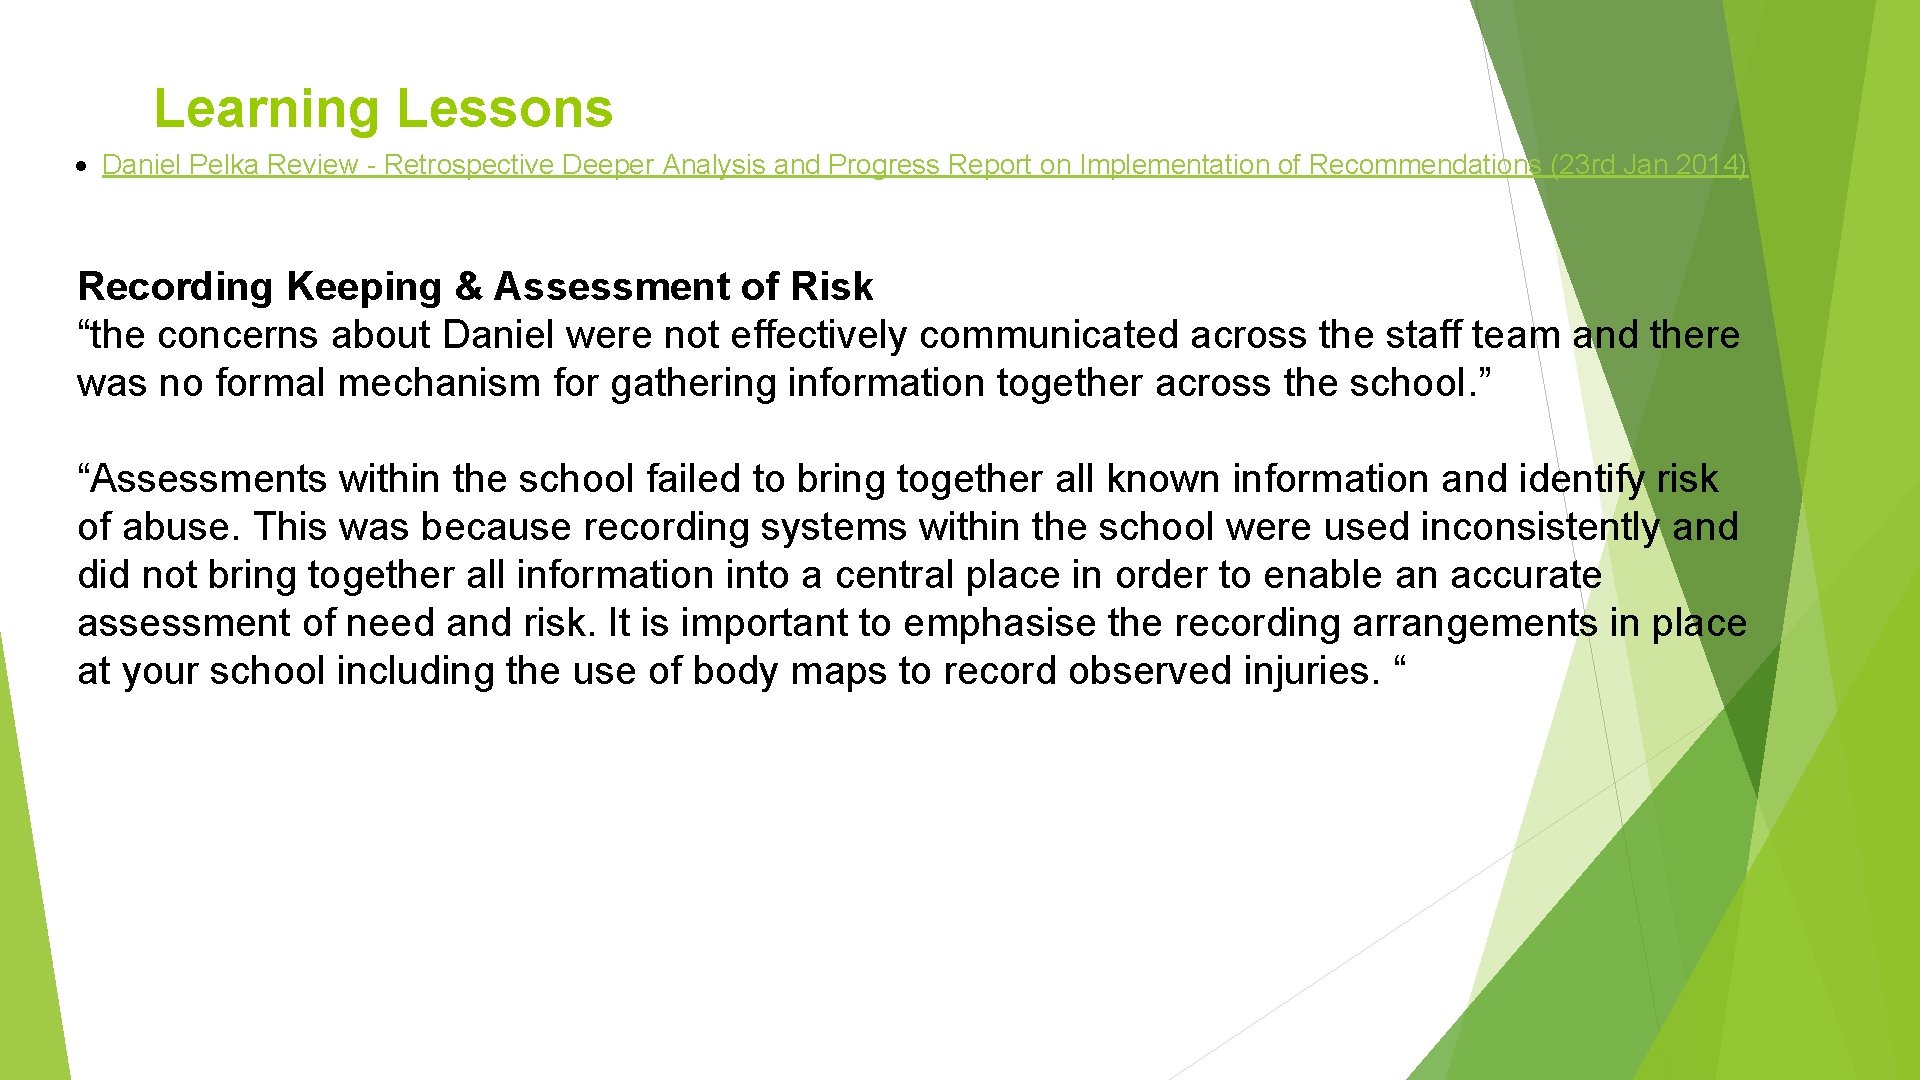 Learning Lessons Daniel Pelka Review - Retrospective Deeper Analysis and Progress Report on Implementation